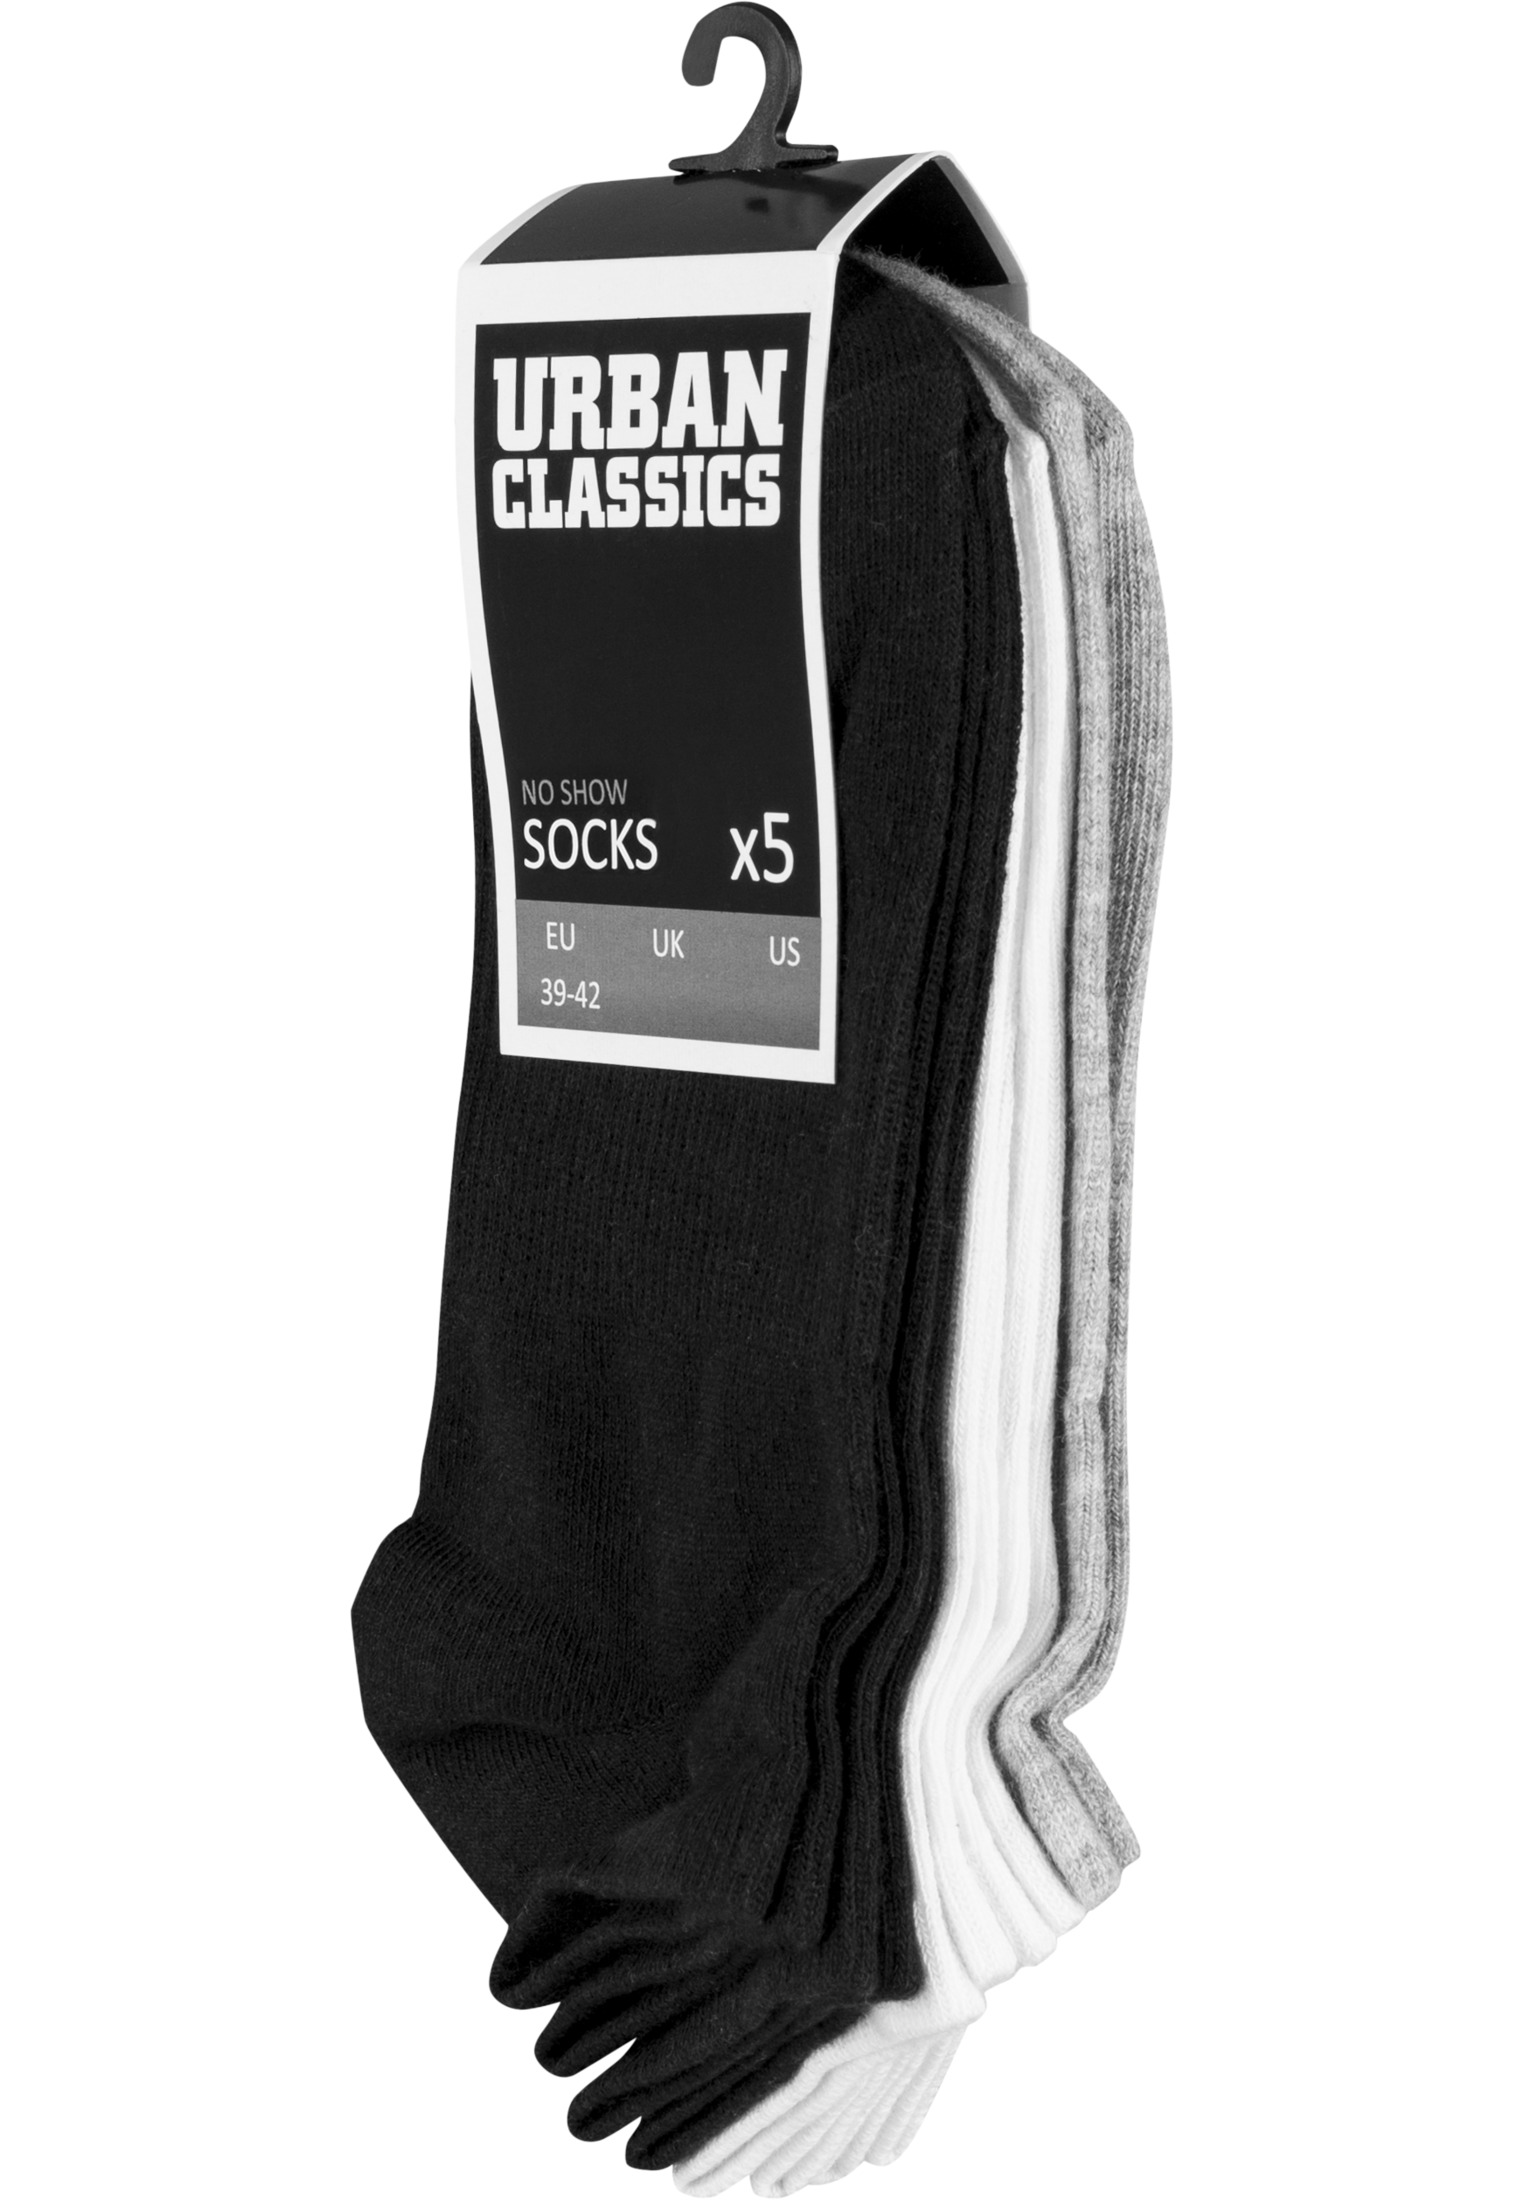 Socken No Show Socks 5-Pack in Farbe blk/wht/gry